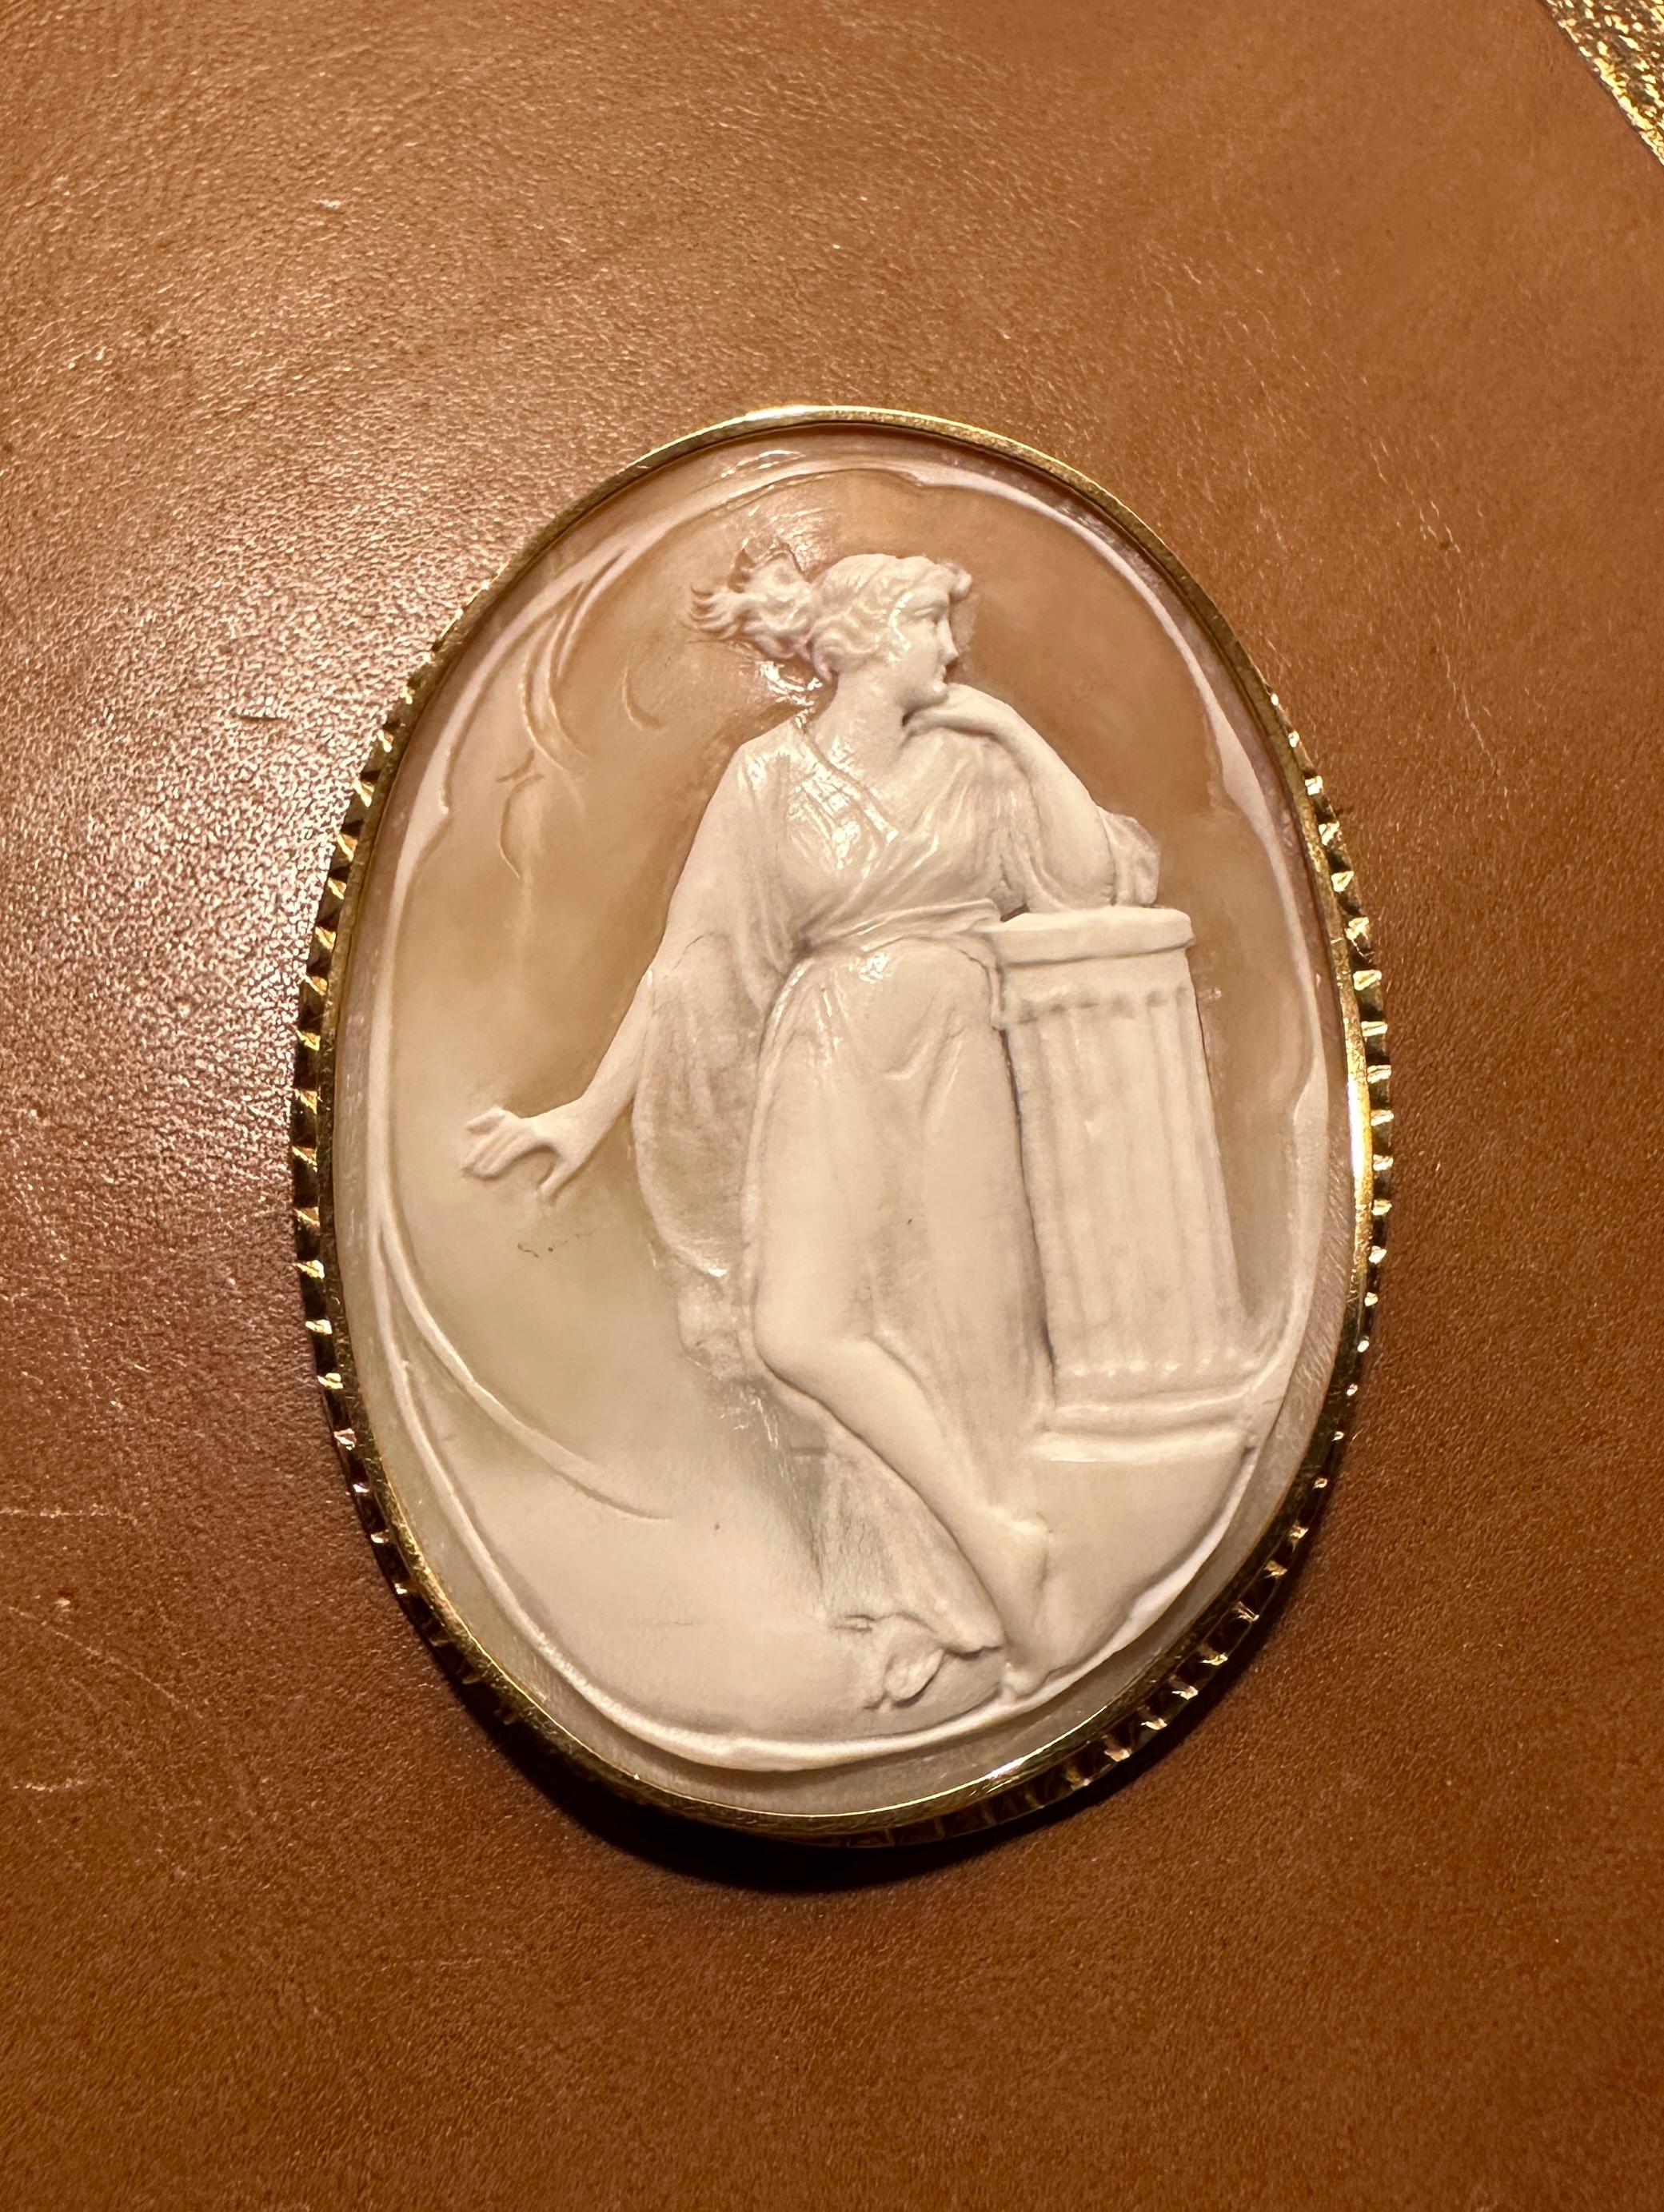 Victorian Goddess Cameo Pendant Brooch Necklace 18 Karat Gold Classical Antique 2.5 Inches For Sale